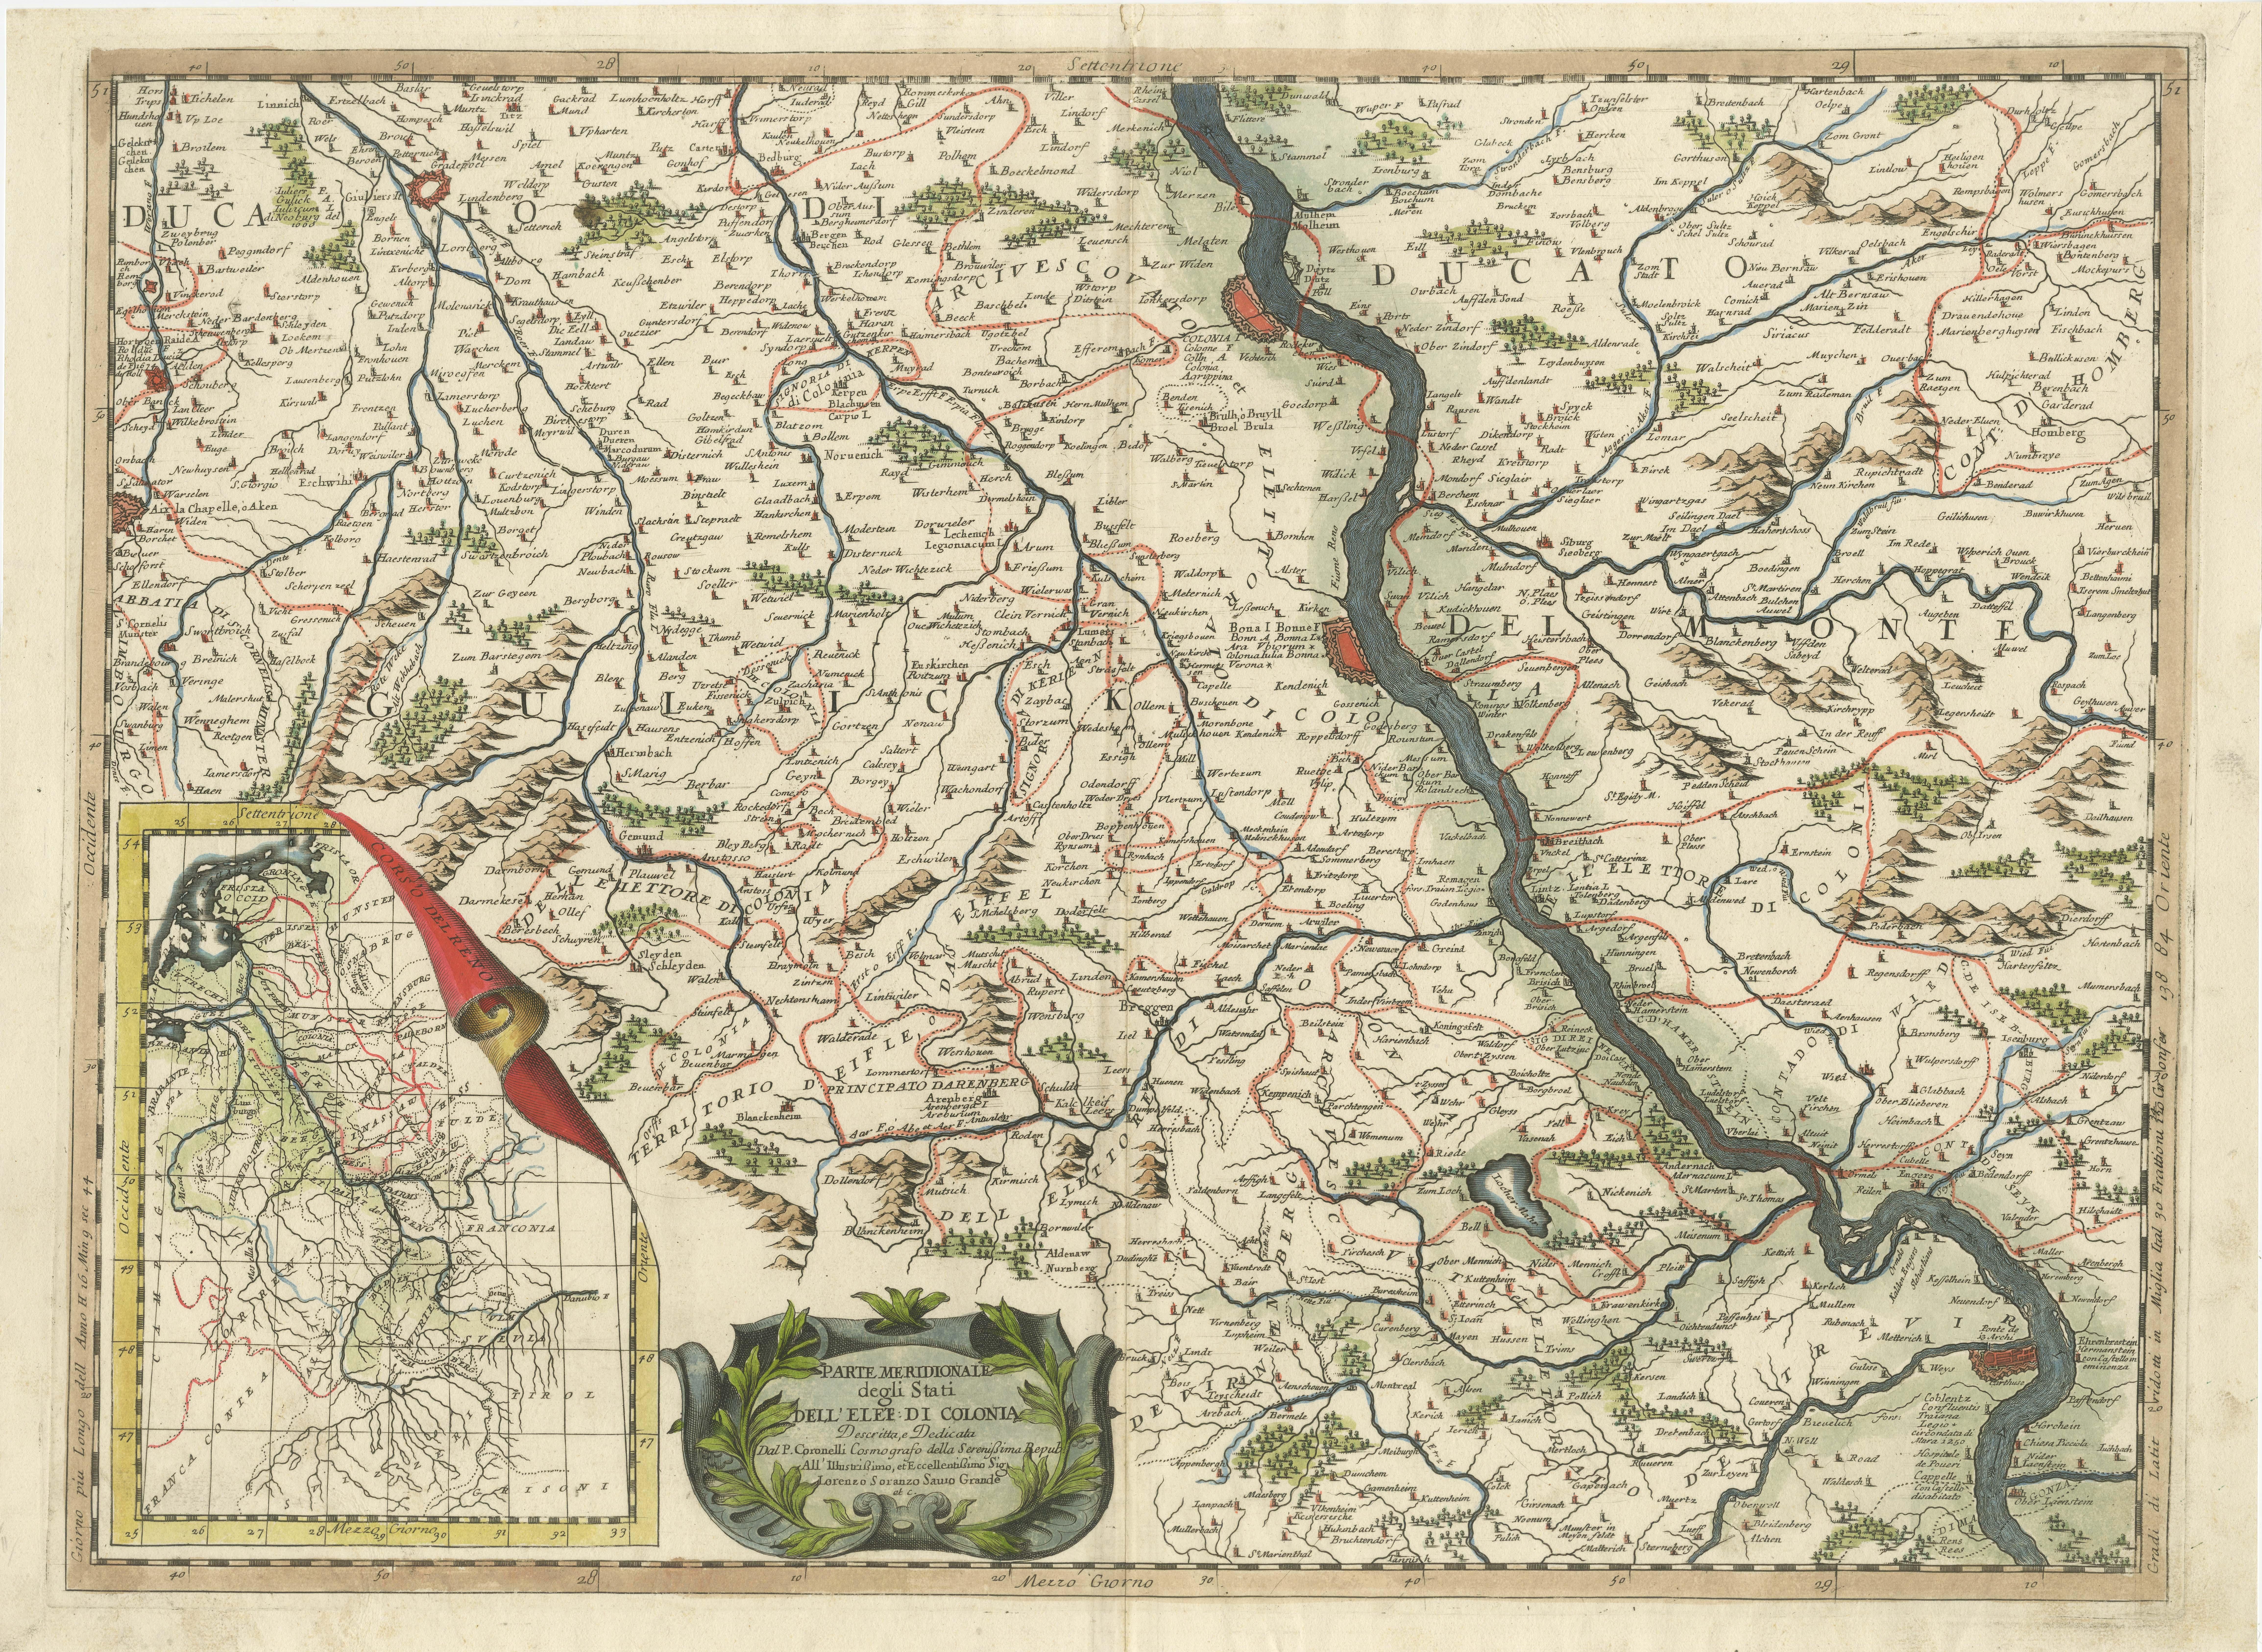 Antique map titled 'Parte meridionale degli Stati dell 'Elet di Colonia'. This map shows the course of the Rhine from Lahnstein to Rheinkassel and the area west to Aachen, Germany. With inset map of the course of the Rhine. Published by V.